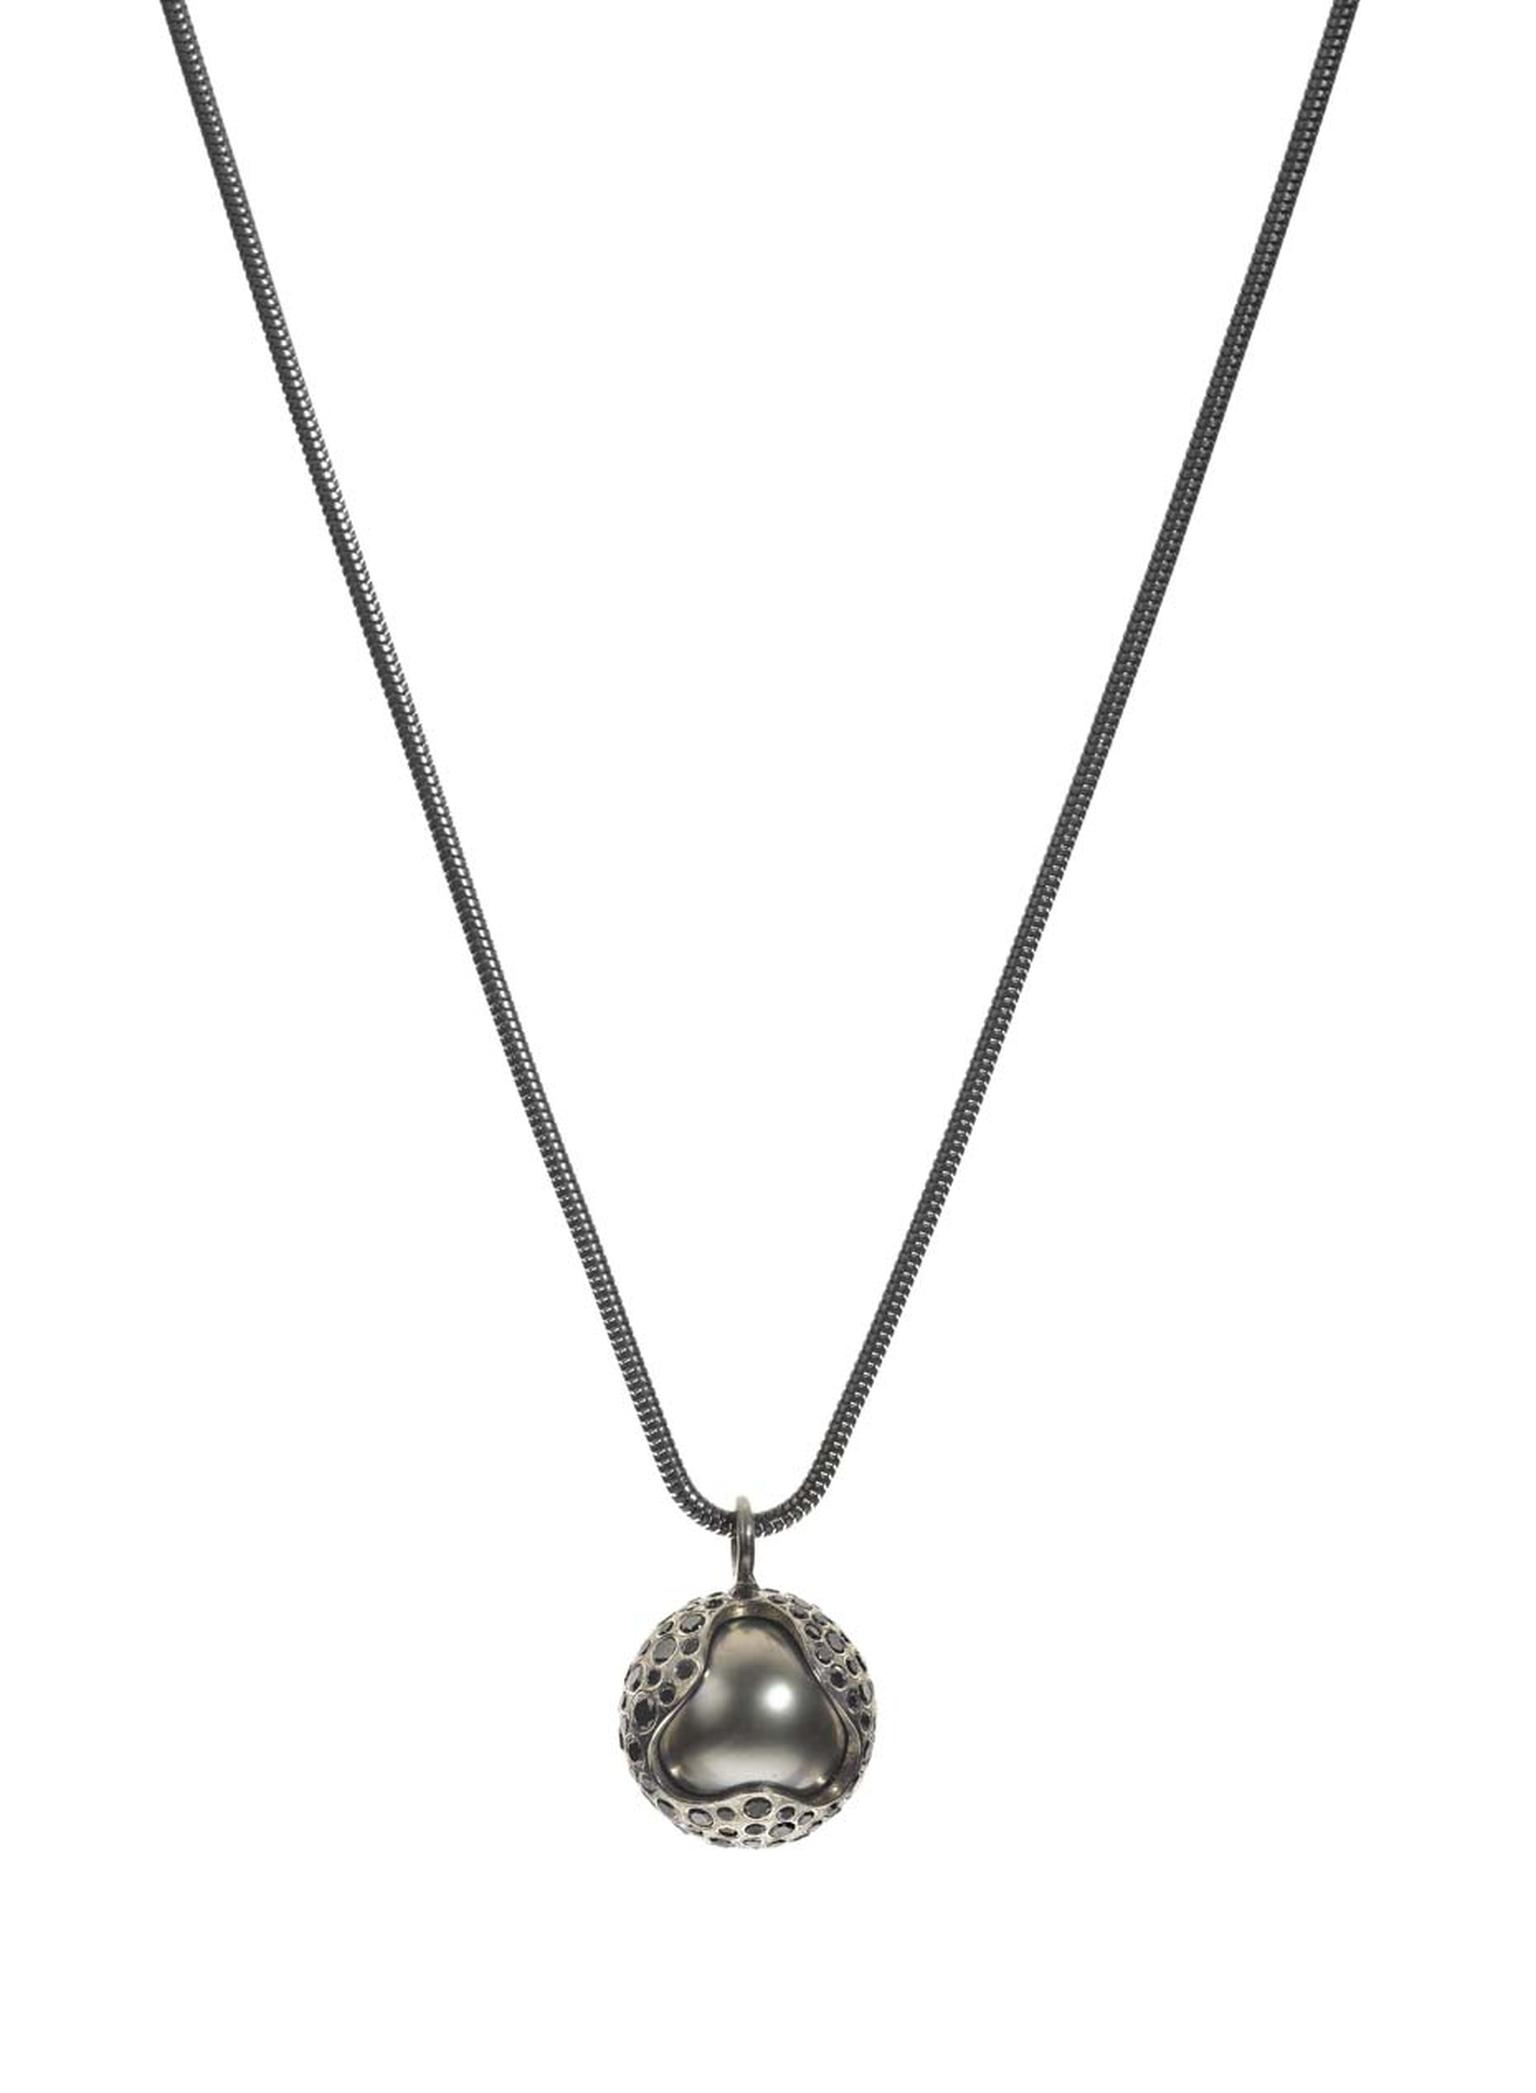 Todd Reed Tahitian pearl necklace in textured white gold,